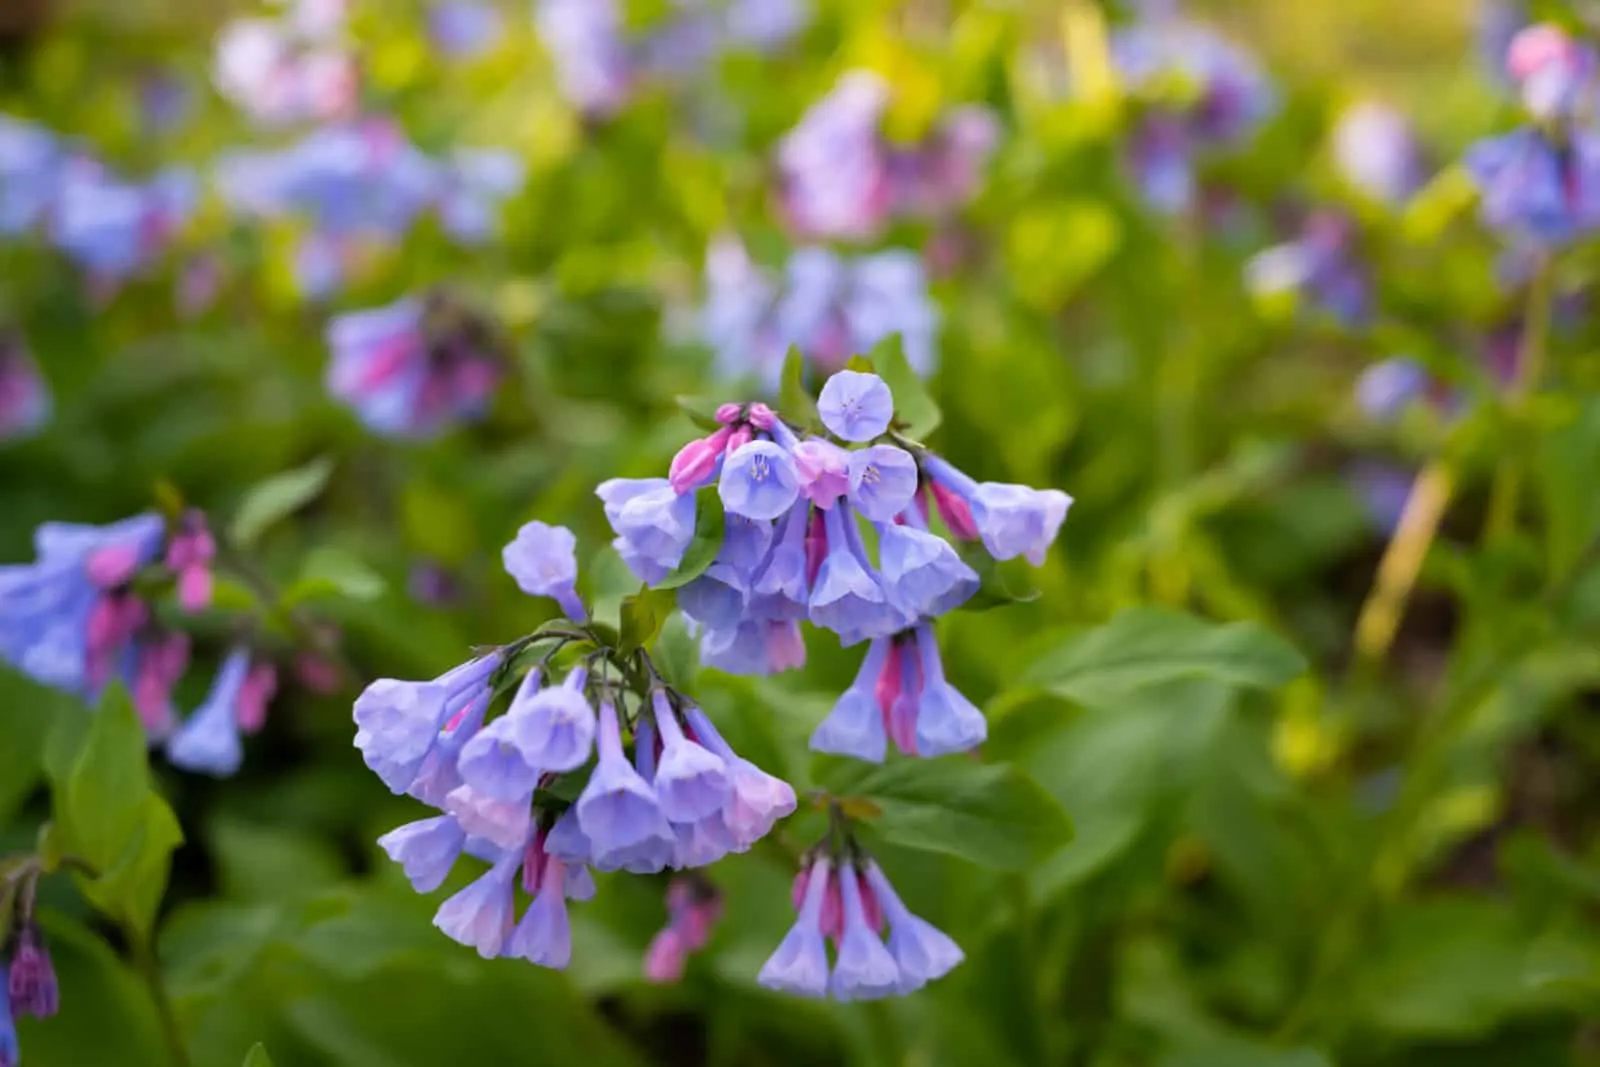 A group of Virginia Bluebells during a spring morning